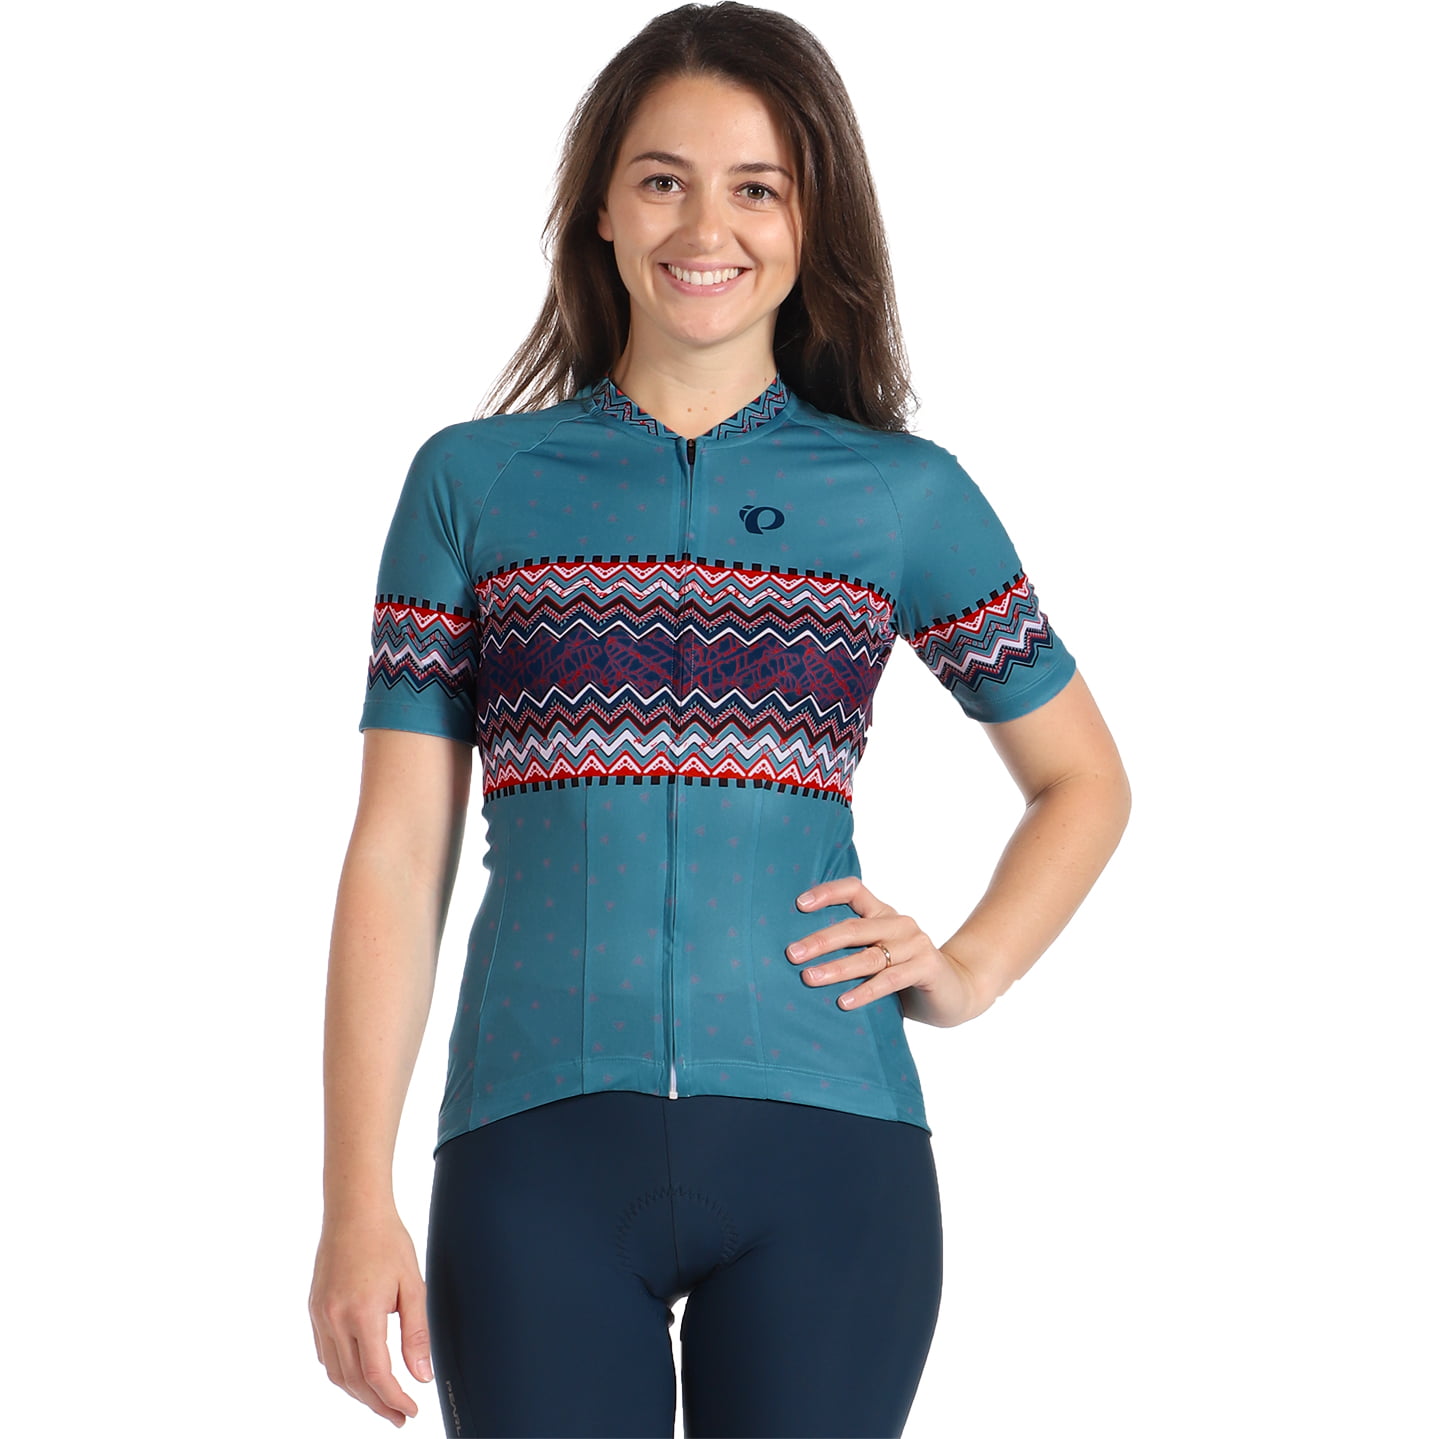 PEARL IZUMI Attack Women’s Jersey Women’s Short Sleeve Jersey, size L, Cycling jersey, Cycling clothing